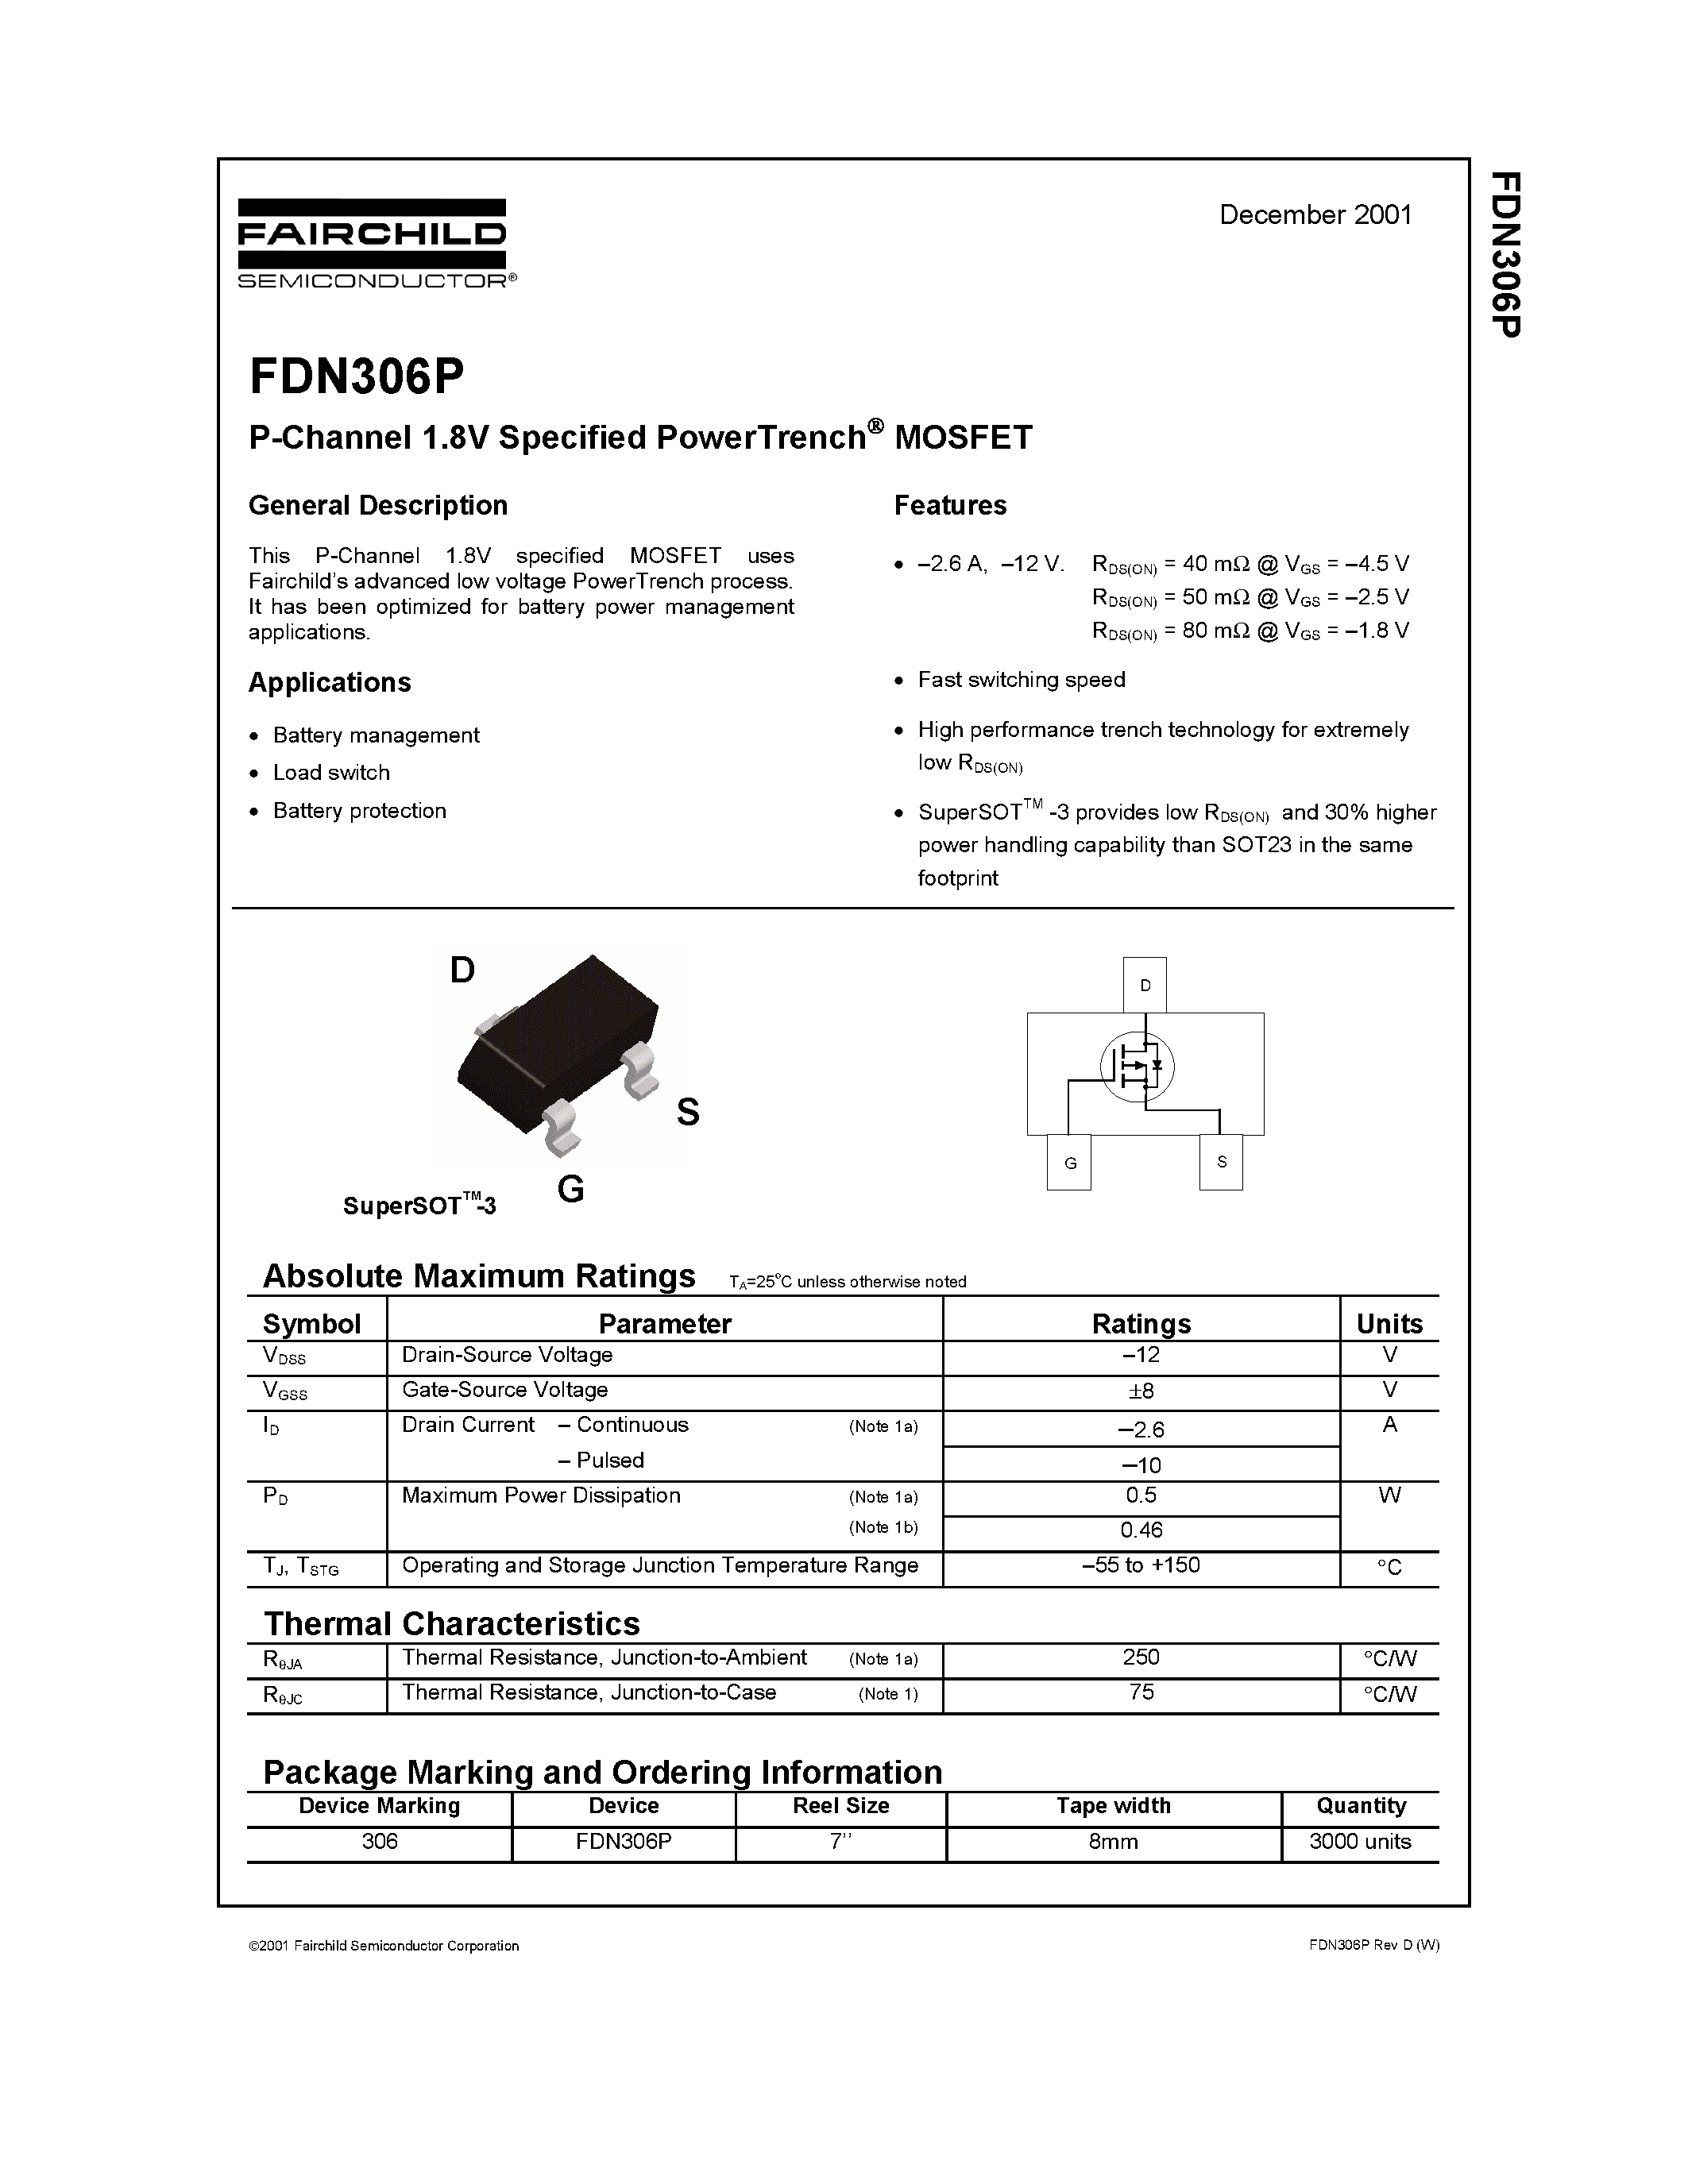 Datasheet FDN306P - P-Channel 1.8V Specified PowerTrench MOSFET page 1